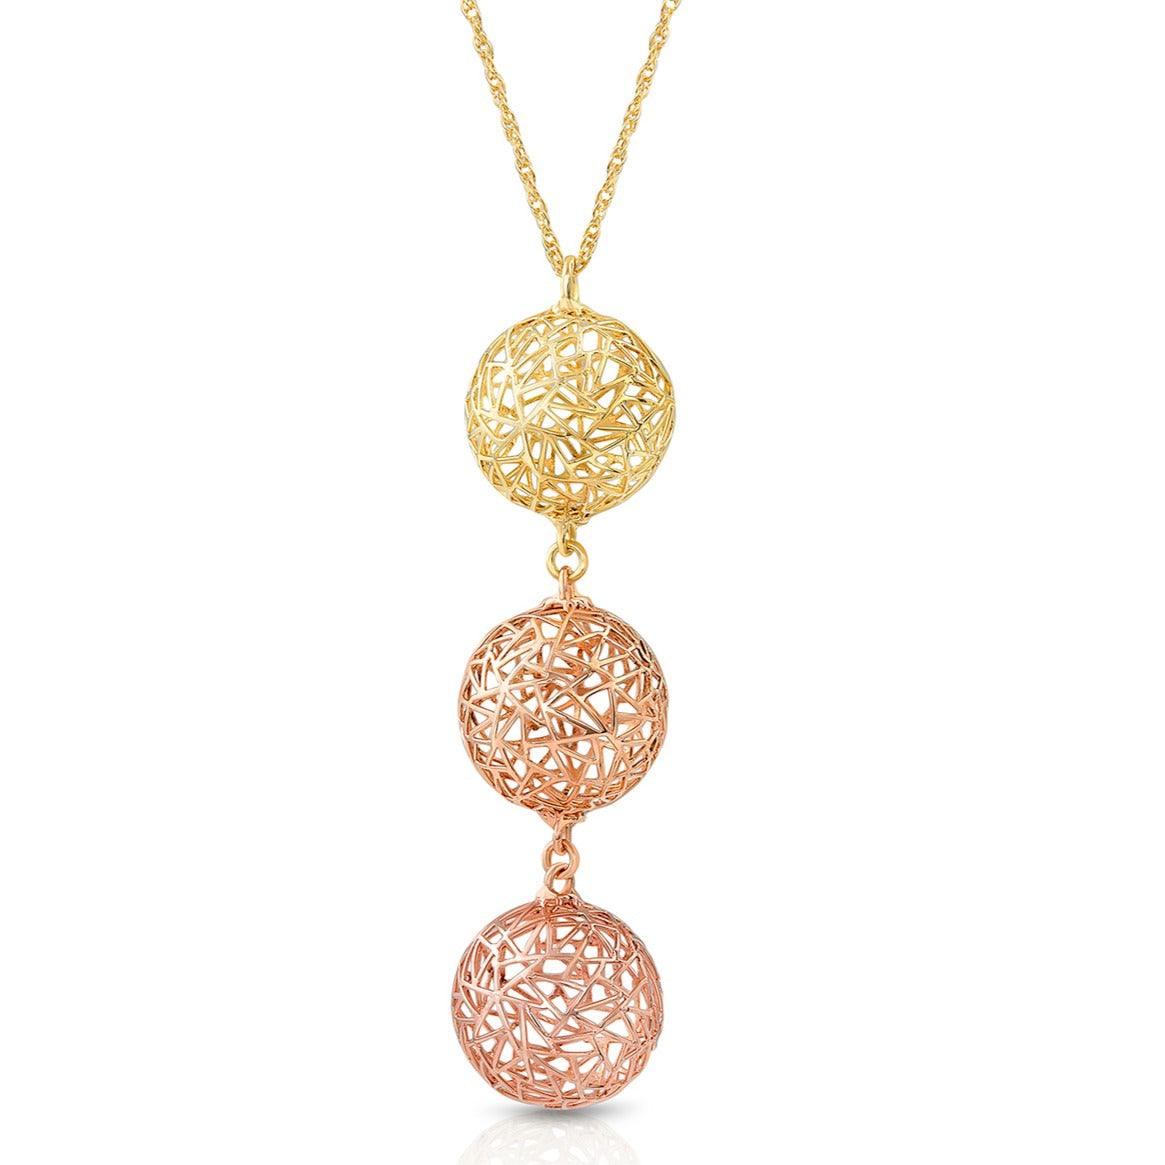 Three Gold Colors Bubble Necklace